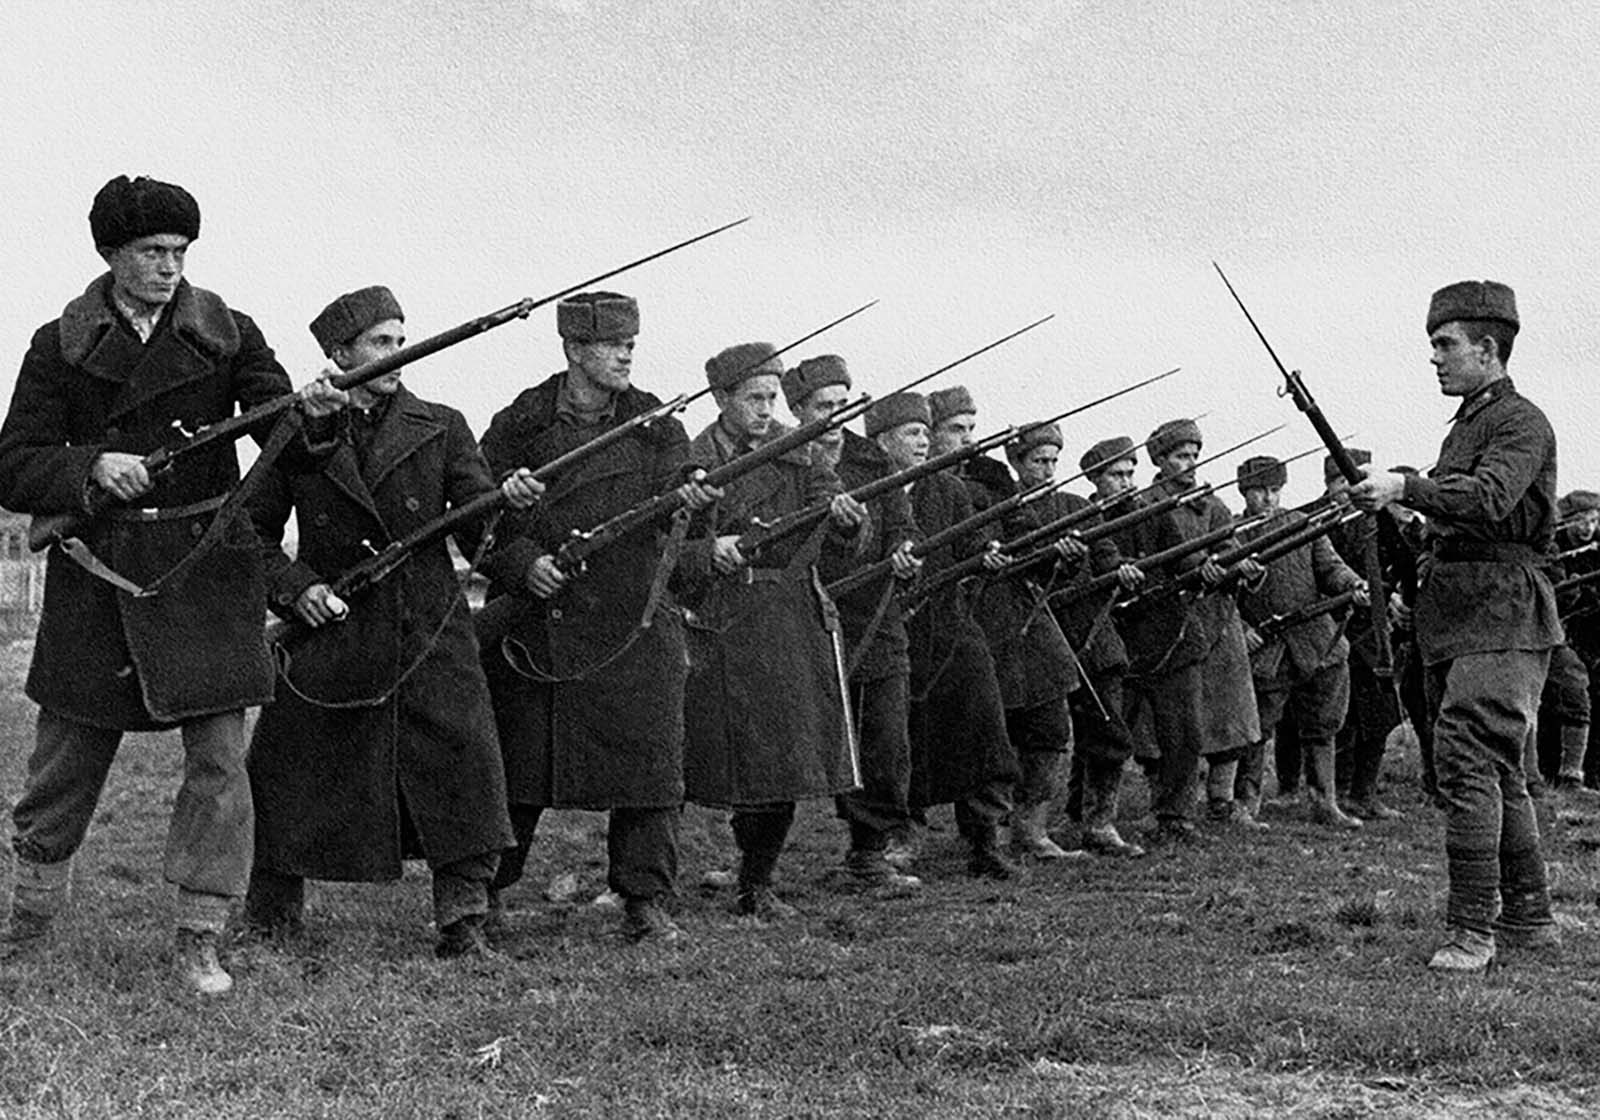 It is often said here that the Red Army of 1941 was not the same army as that of 1942. What contrasted these armies?